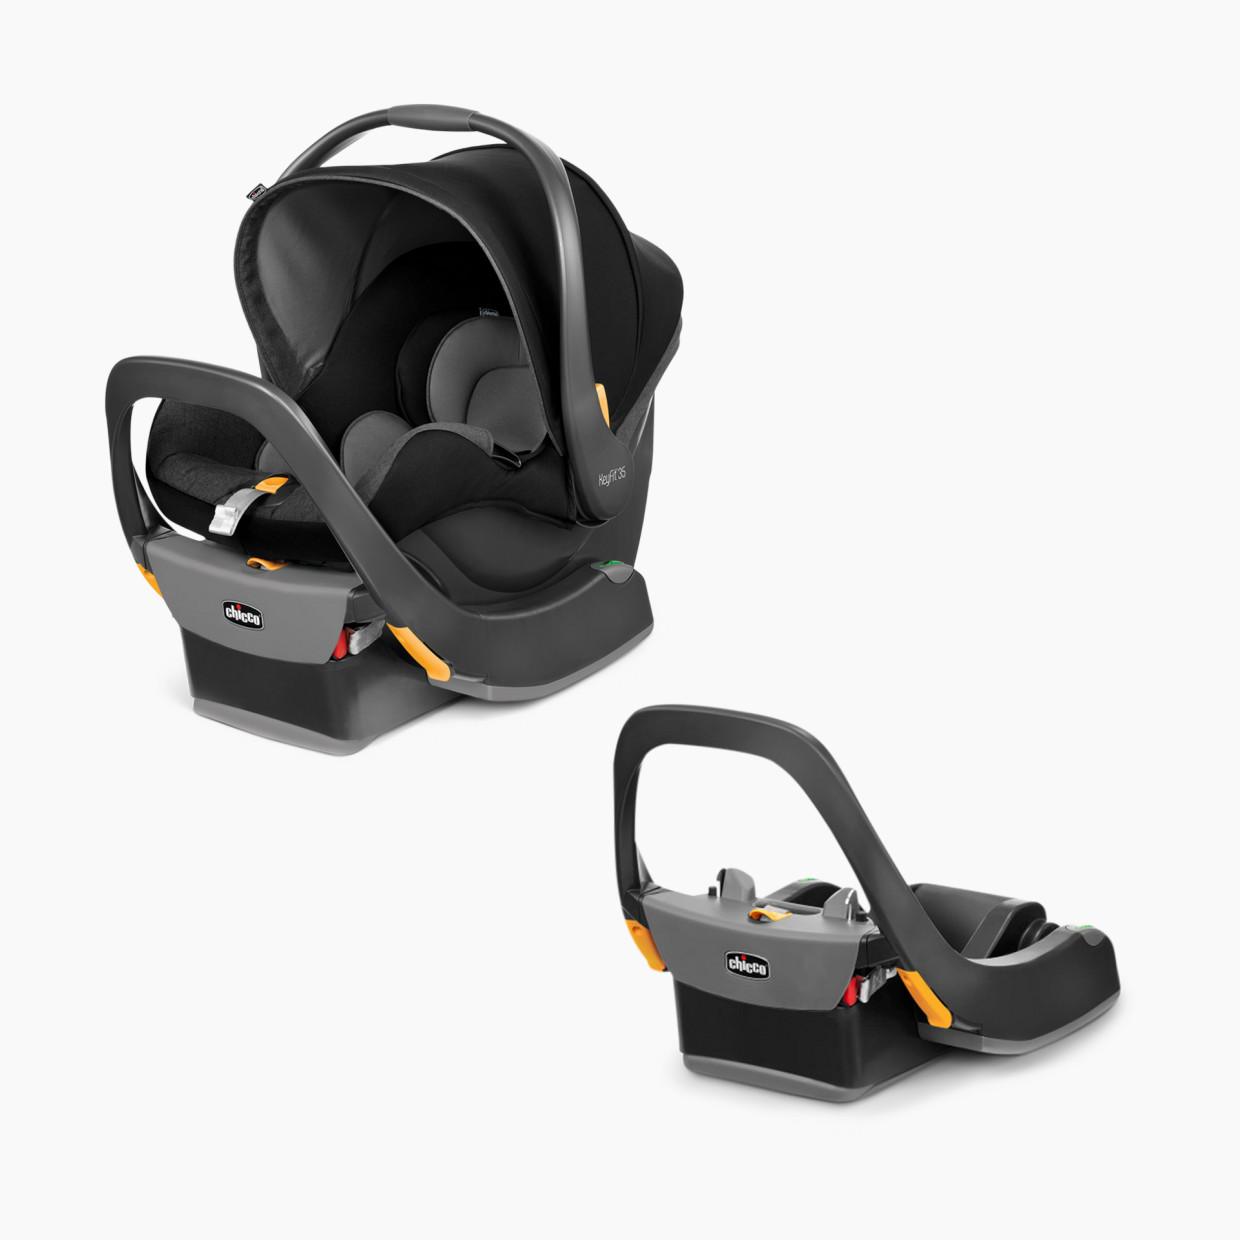 Chicco Chicco KeyFit 35 Infant Car Seat & Extra Base Bundle - Onyx.